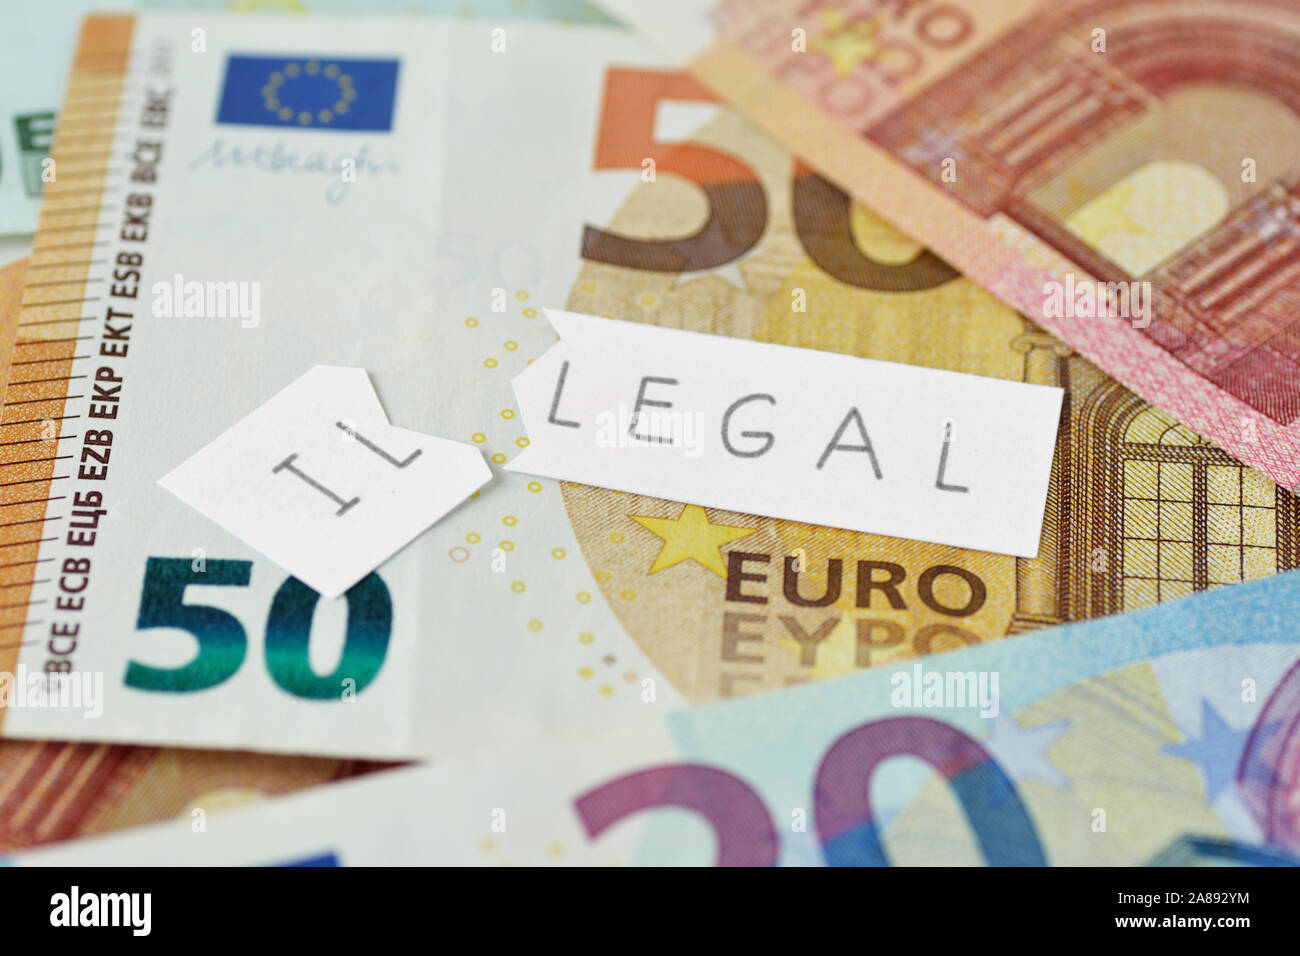 Torn paper note with illegal text on euro banknotes background - Concept of legal and illegal Stock Photo